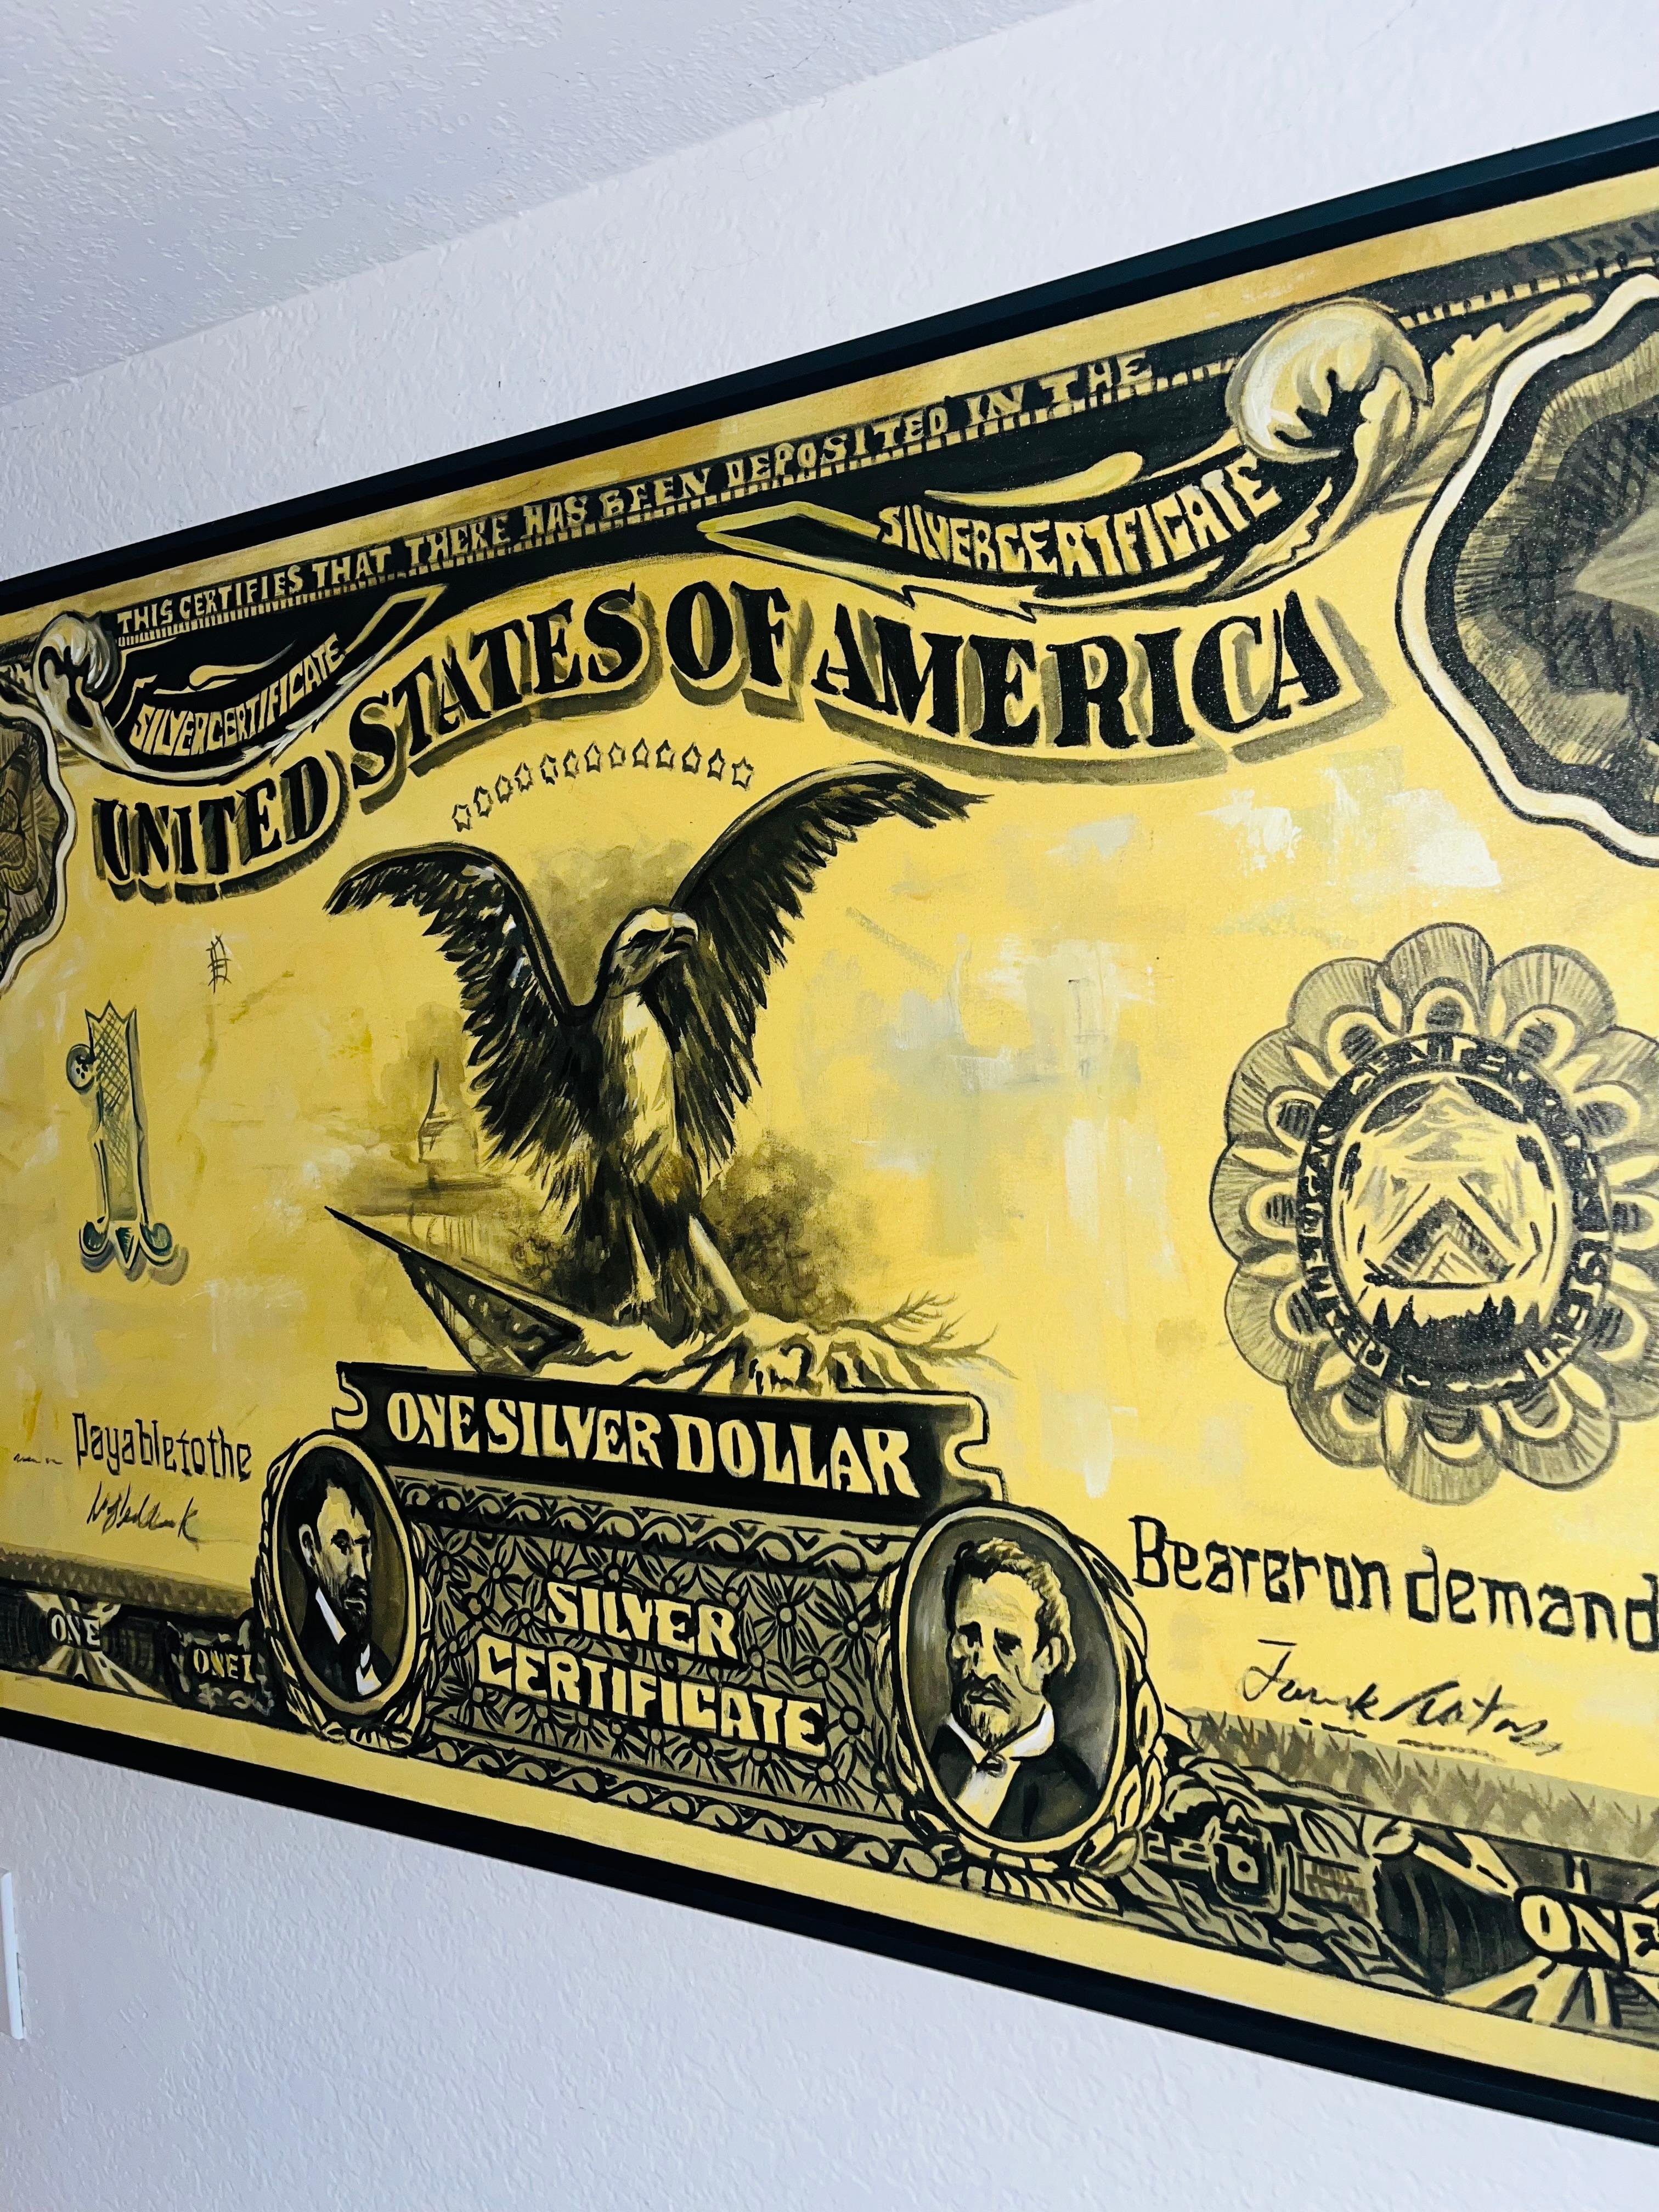               **ANNUAL SUPER SALE UNTIL MAY 15TH ONLY**
**This Price Won't Be Repeated Again This Year - Take Advantage**

'Money Talks' is the new series of artist Mauro Oliveira.

Highly labored one of a kind pieces, celebrating the dollar